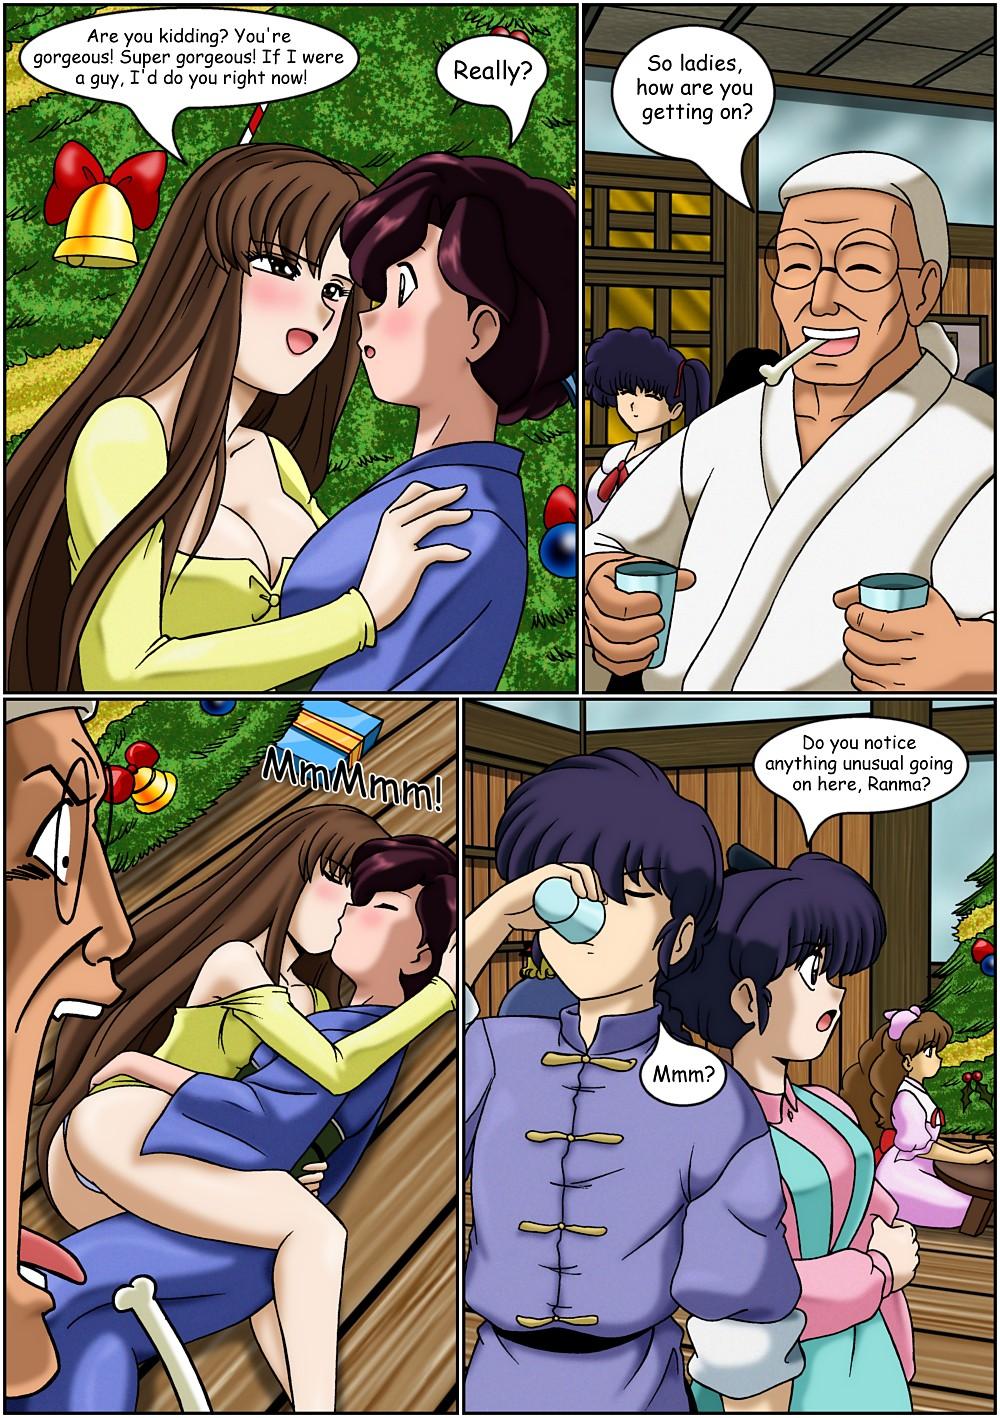 A Ranma Christmas Story - part 2